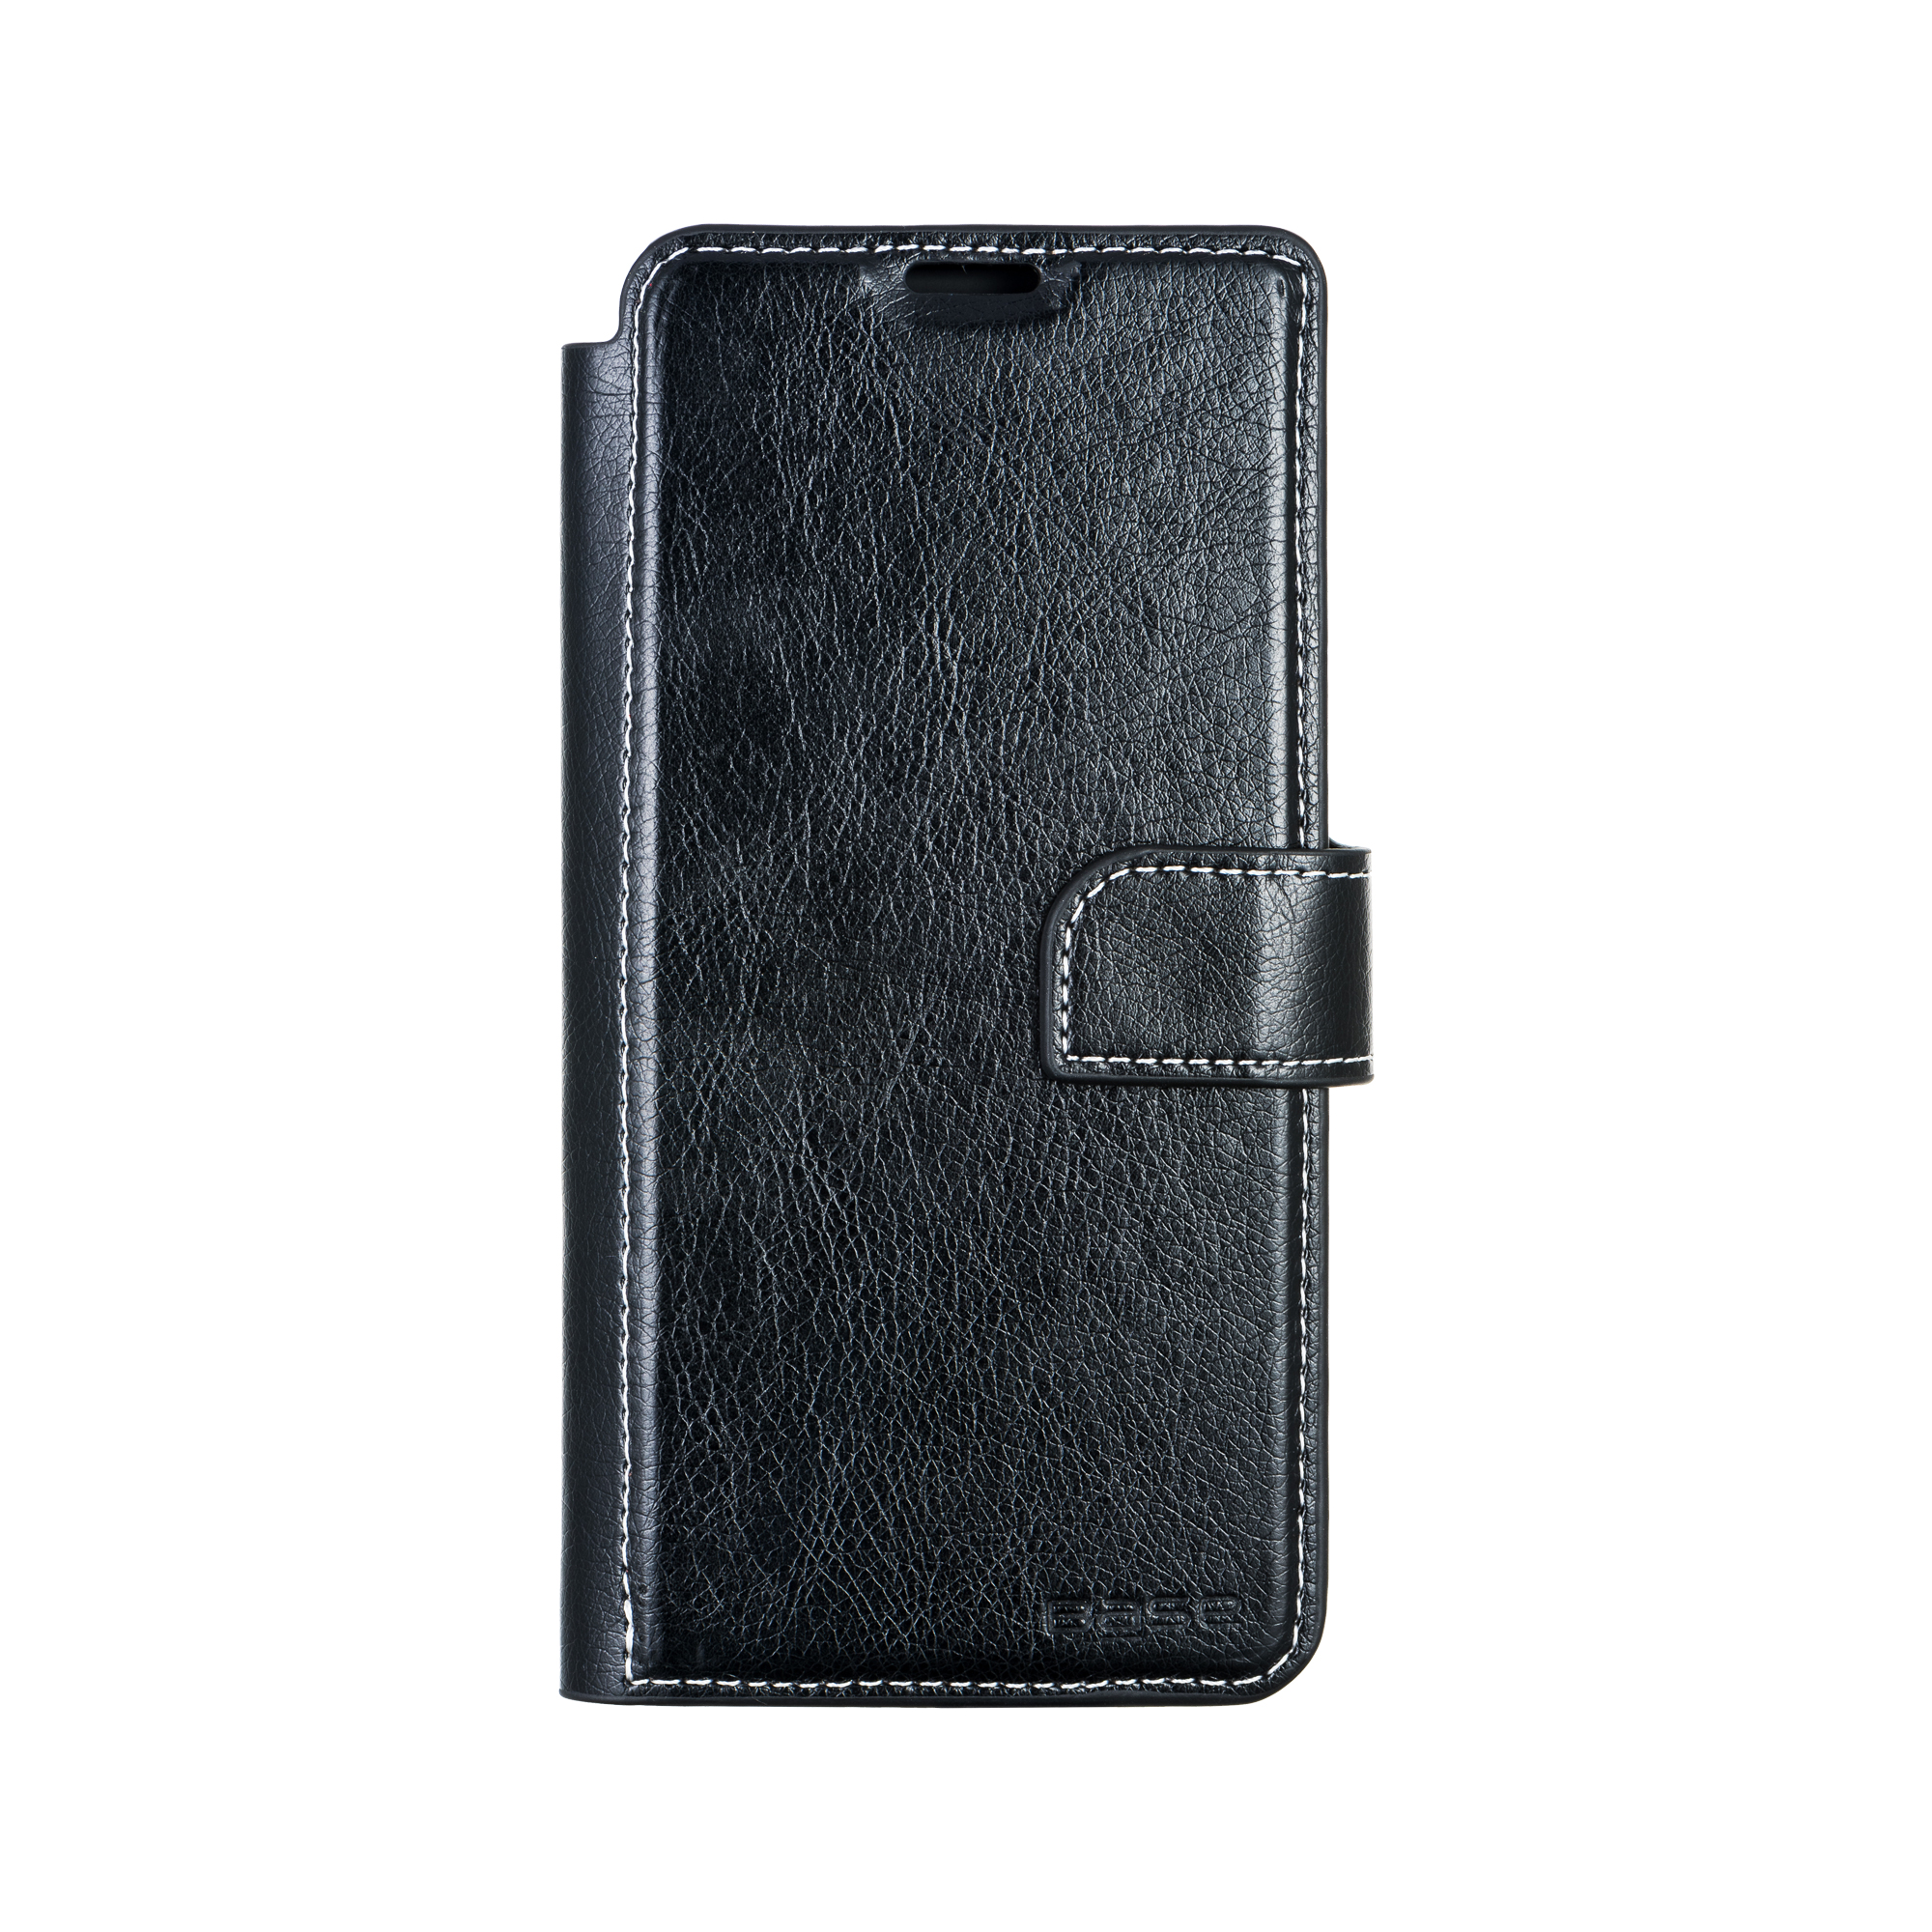 Base Folio Exec Wallet for iPhone 11 Pro Max